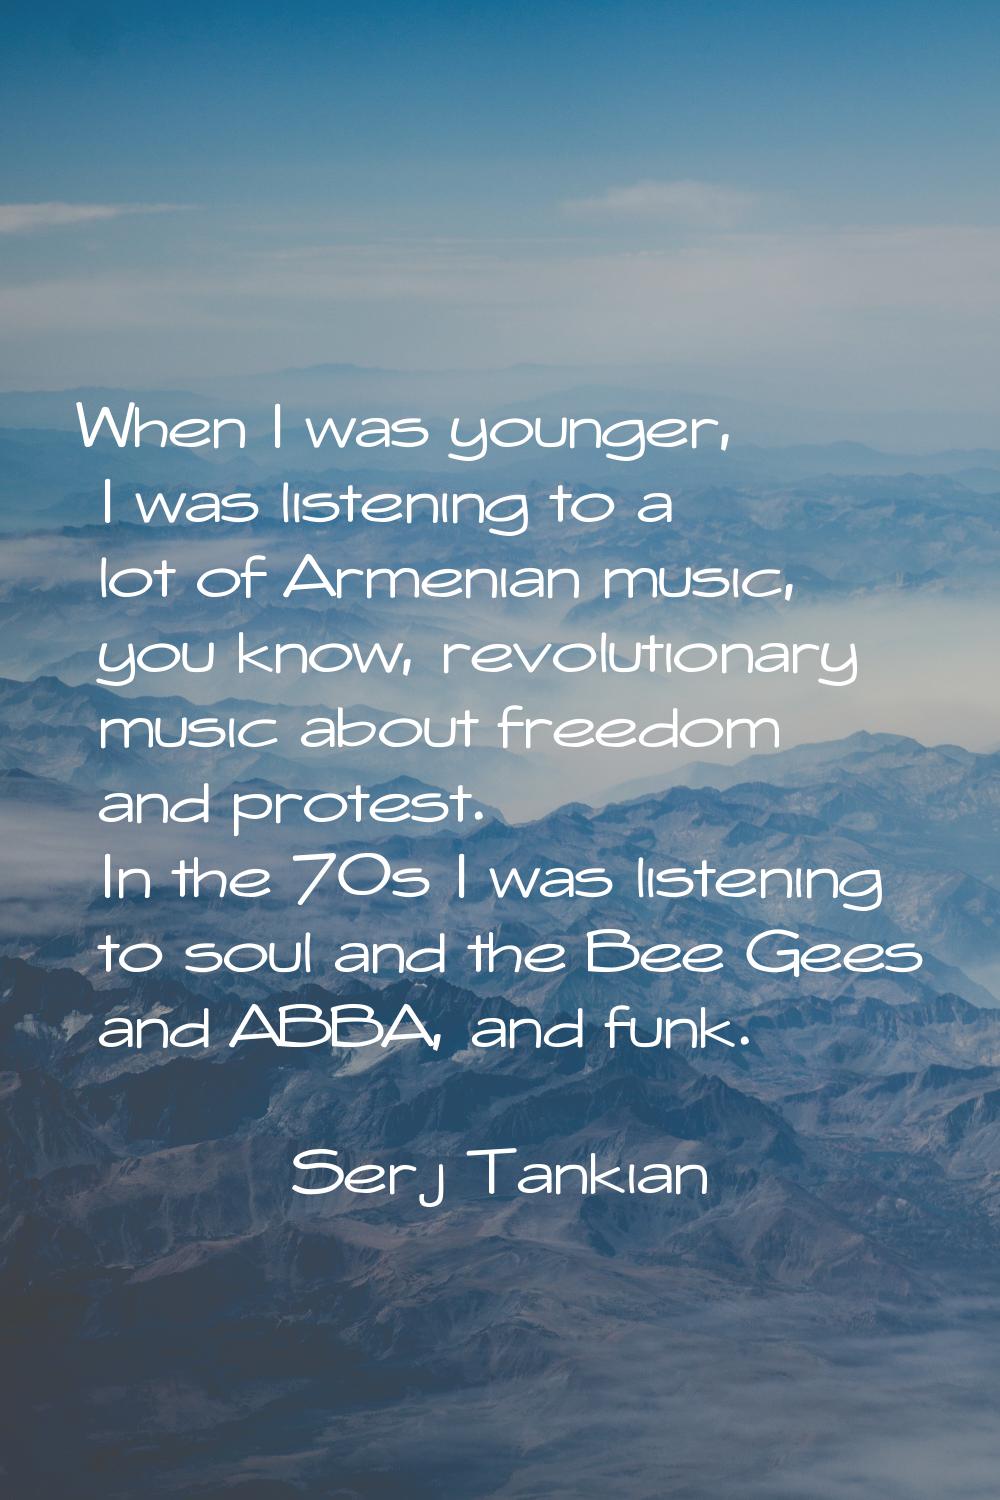 When I was younger, I was listening to a lot of Armenian music, you know, revolutionary music about